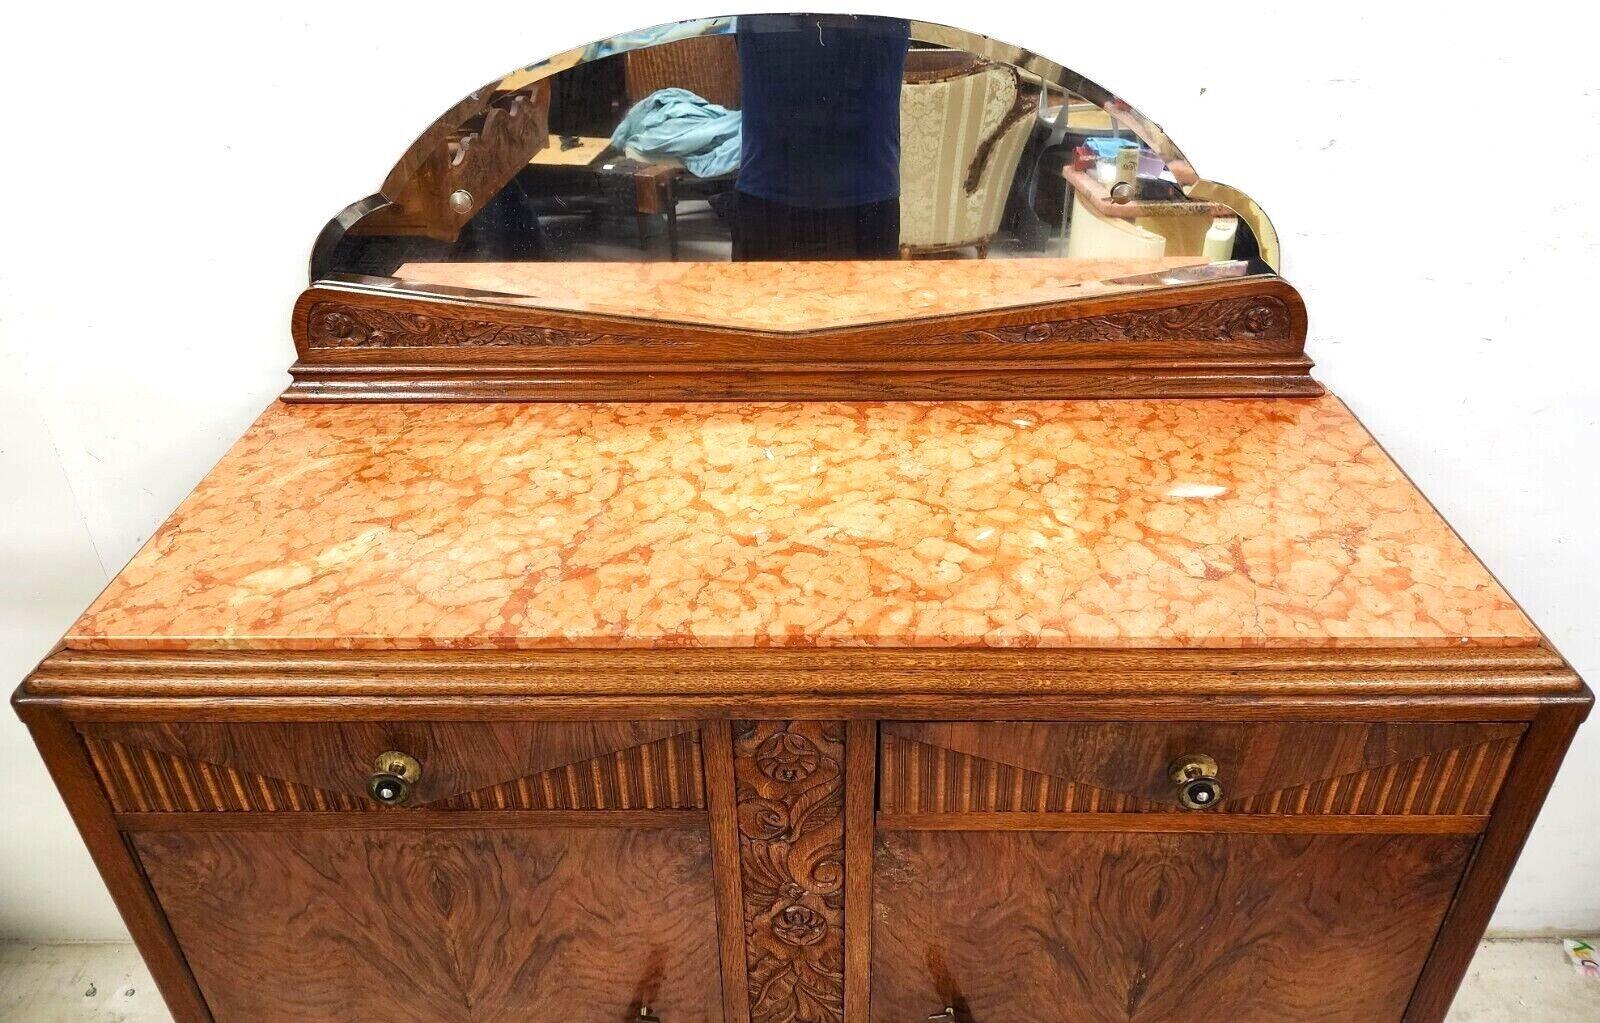 Offering One Of Our Recent Palm Beach Estate Fine Furniture Acquisitions Of A
Antique 1920s Art Deco Bar Cabinet Peach Marble Top and Amboyna Burl
Featuring a beautiful piece of antique peach marble top, lots of hand-carved accents, and 2 working